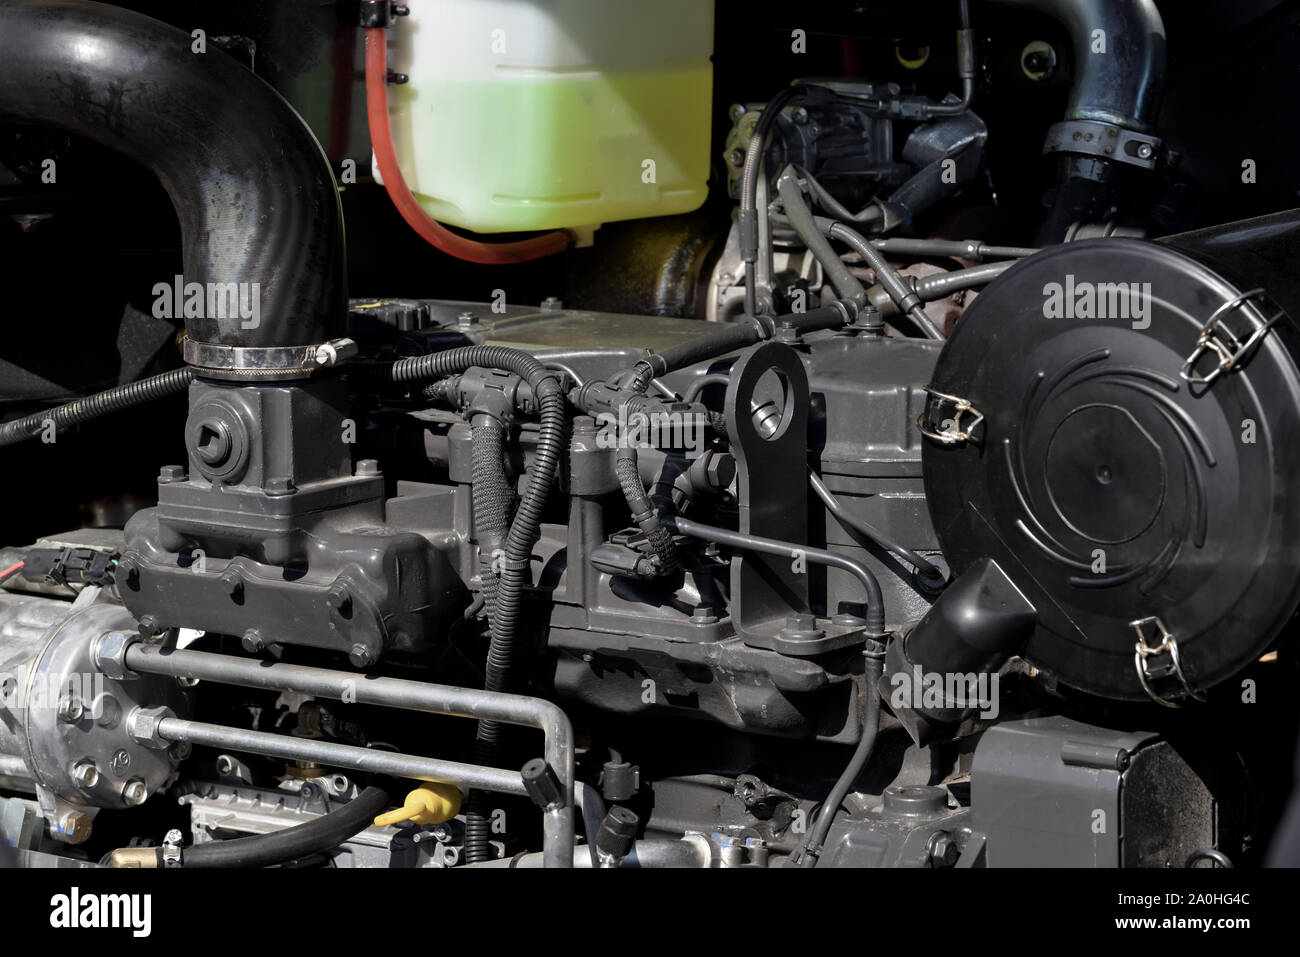 Modern new agricultural diesel tractor engine Stock Photo